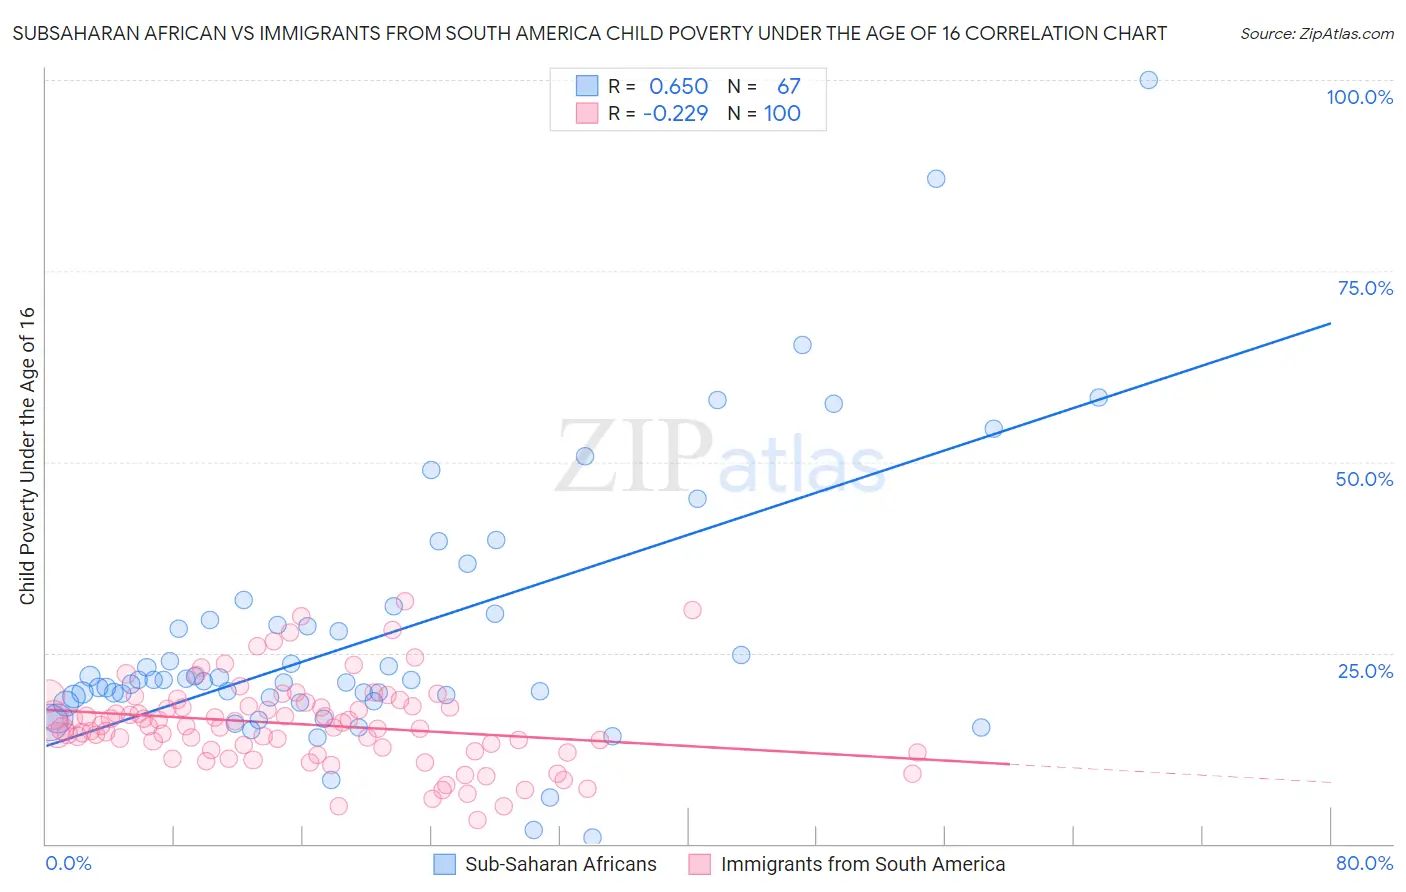 Subsaharan African vs Immigrants from South America Child Poverty Under the Age of 16